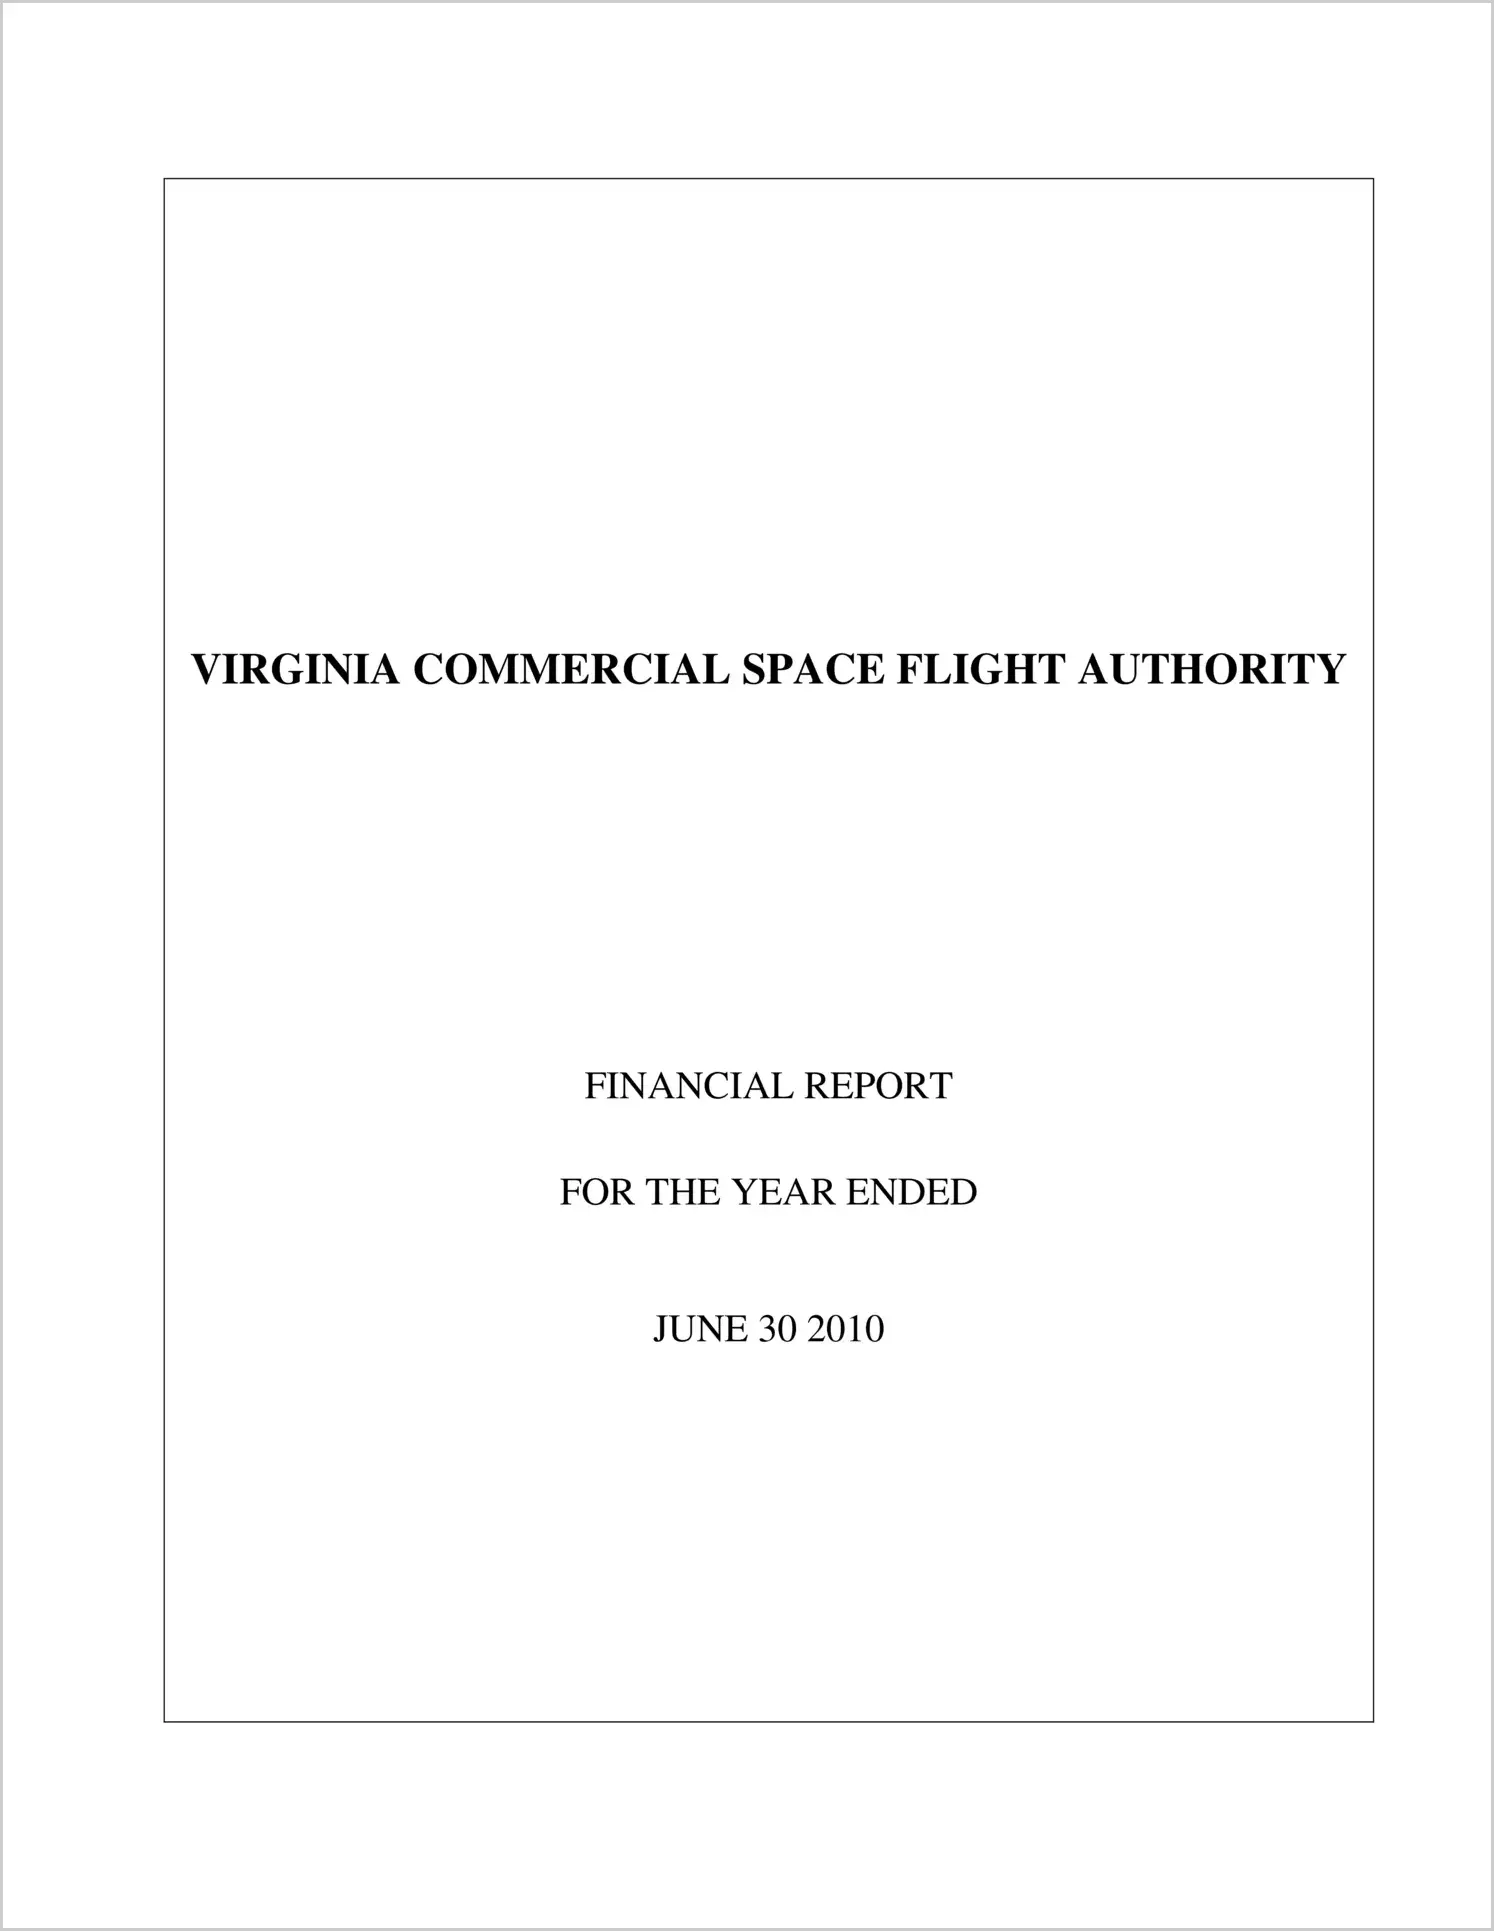 Virginia Commercial Space Flight Authority Financial Statements Report for the year ended June 30, 2010